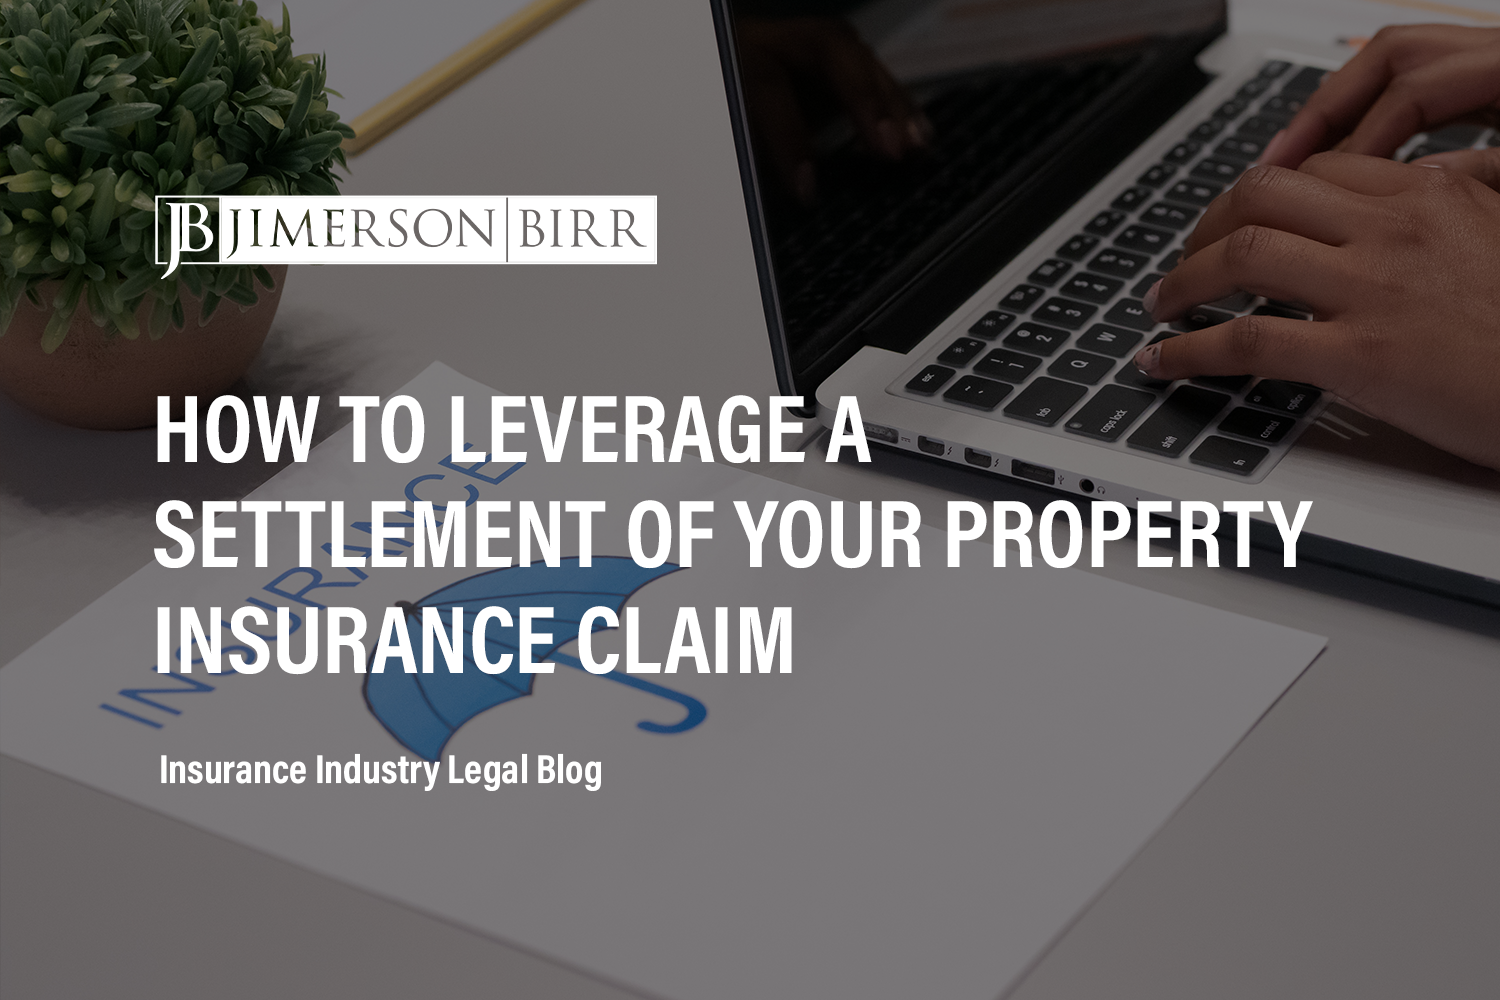 How to Leverage a Settlement of Your Property Insurance Claim